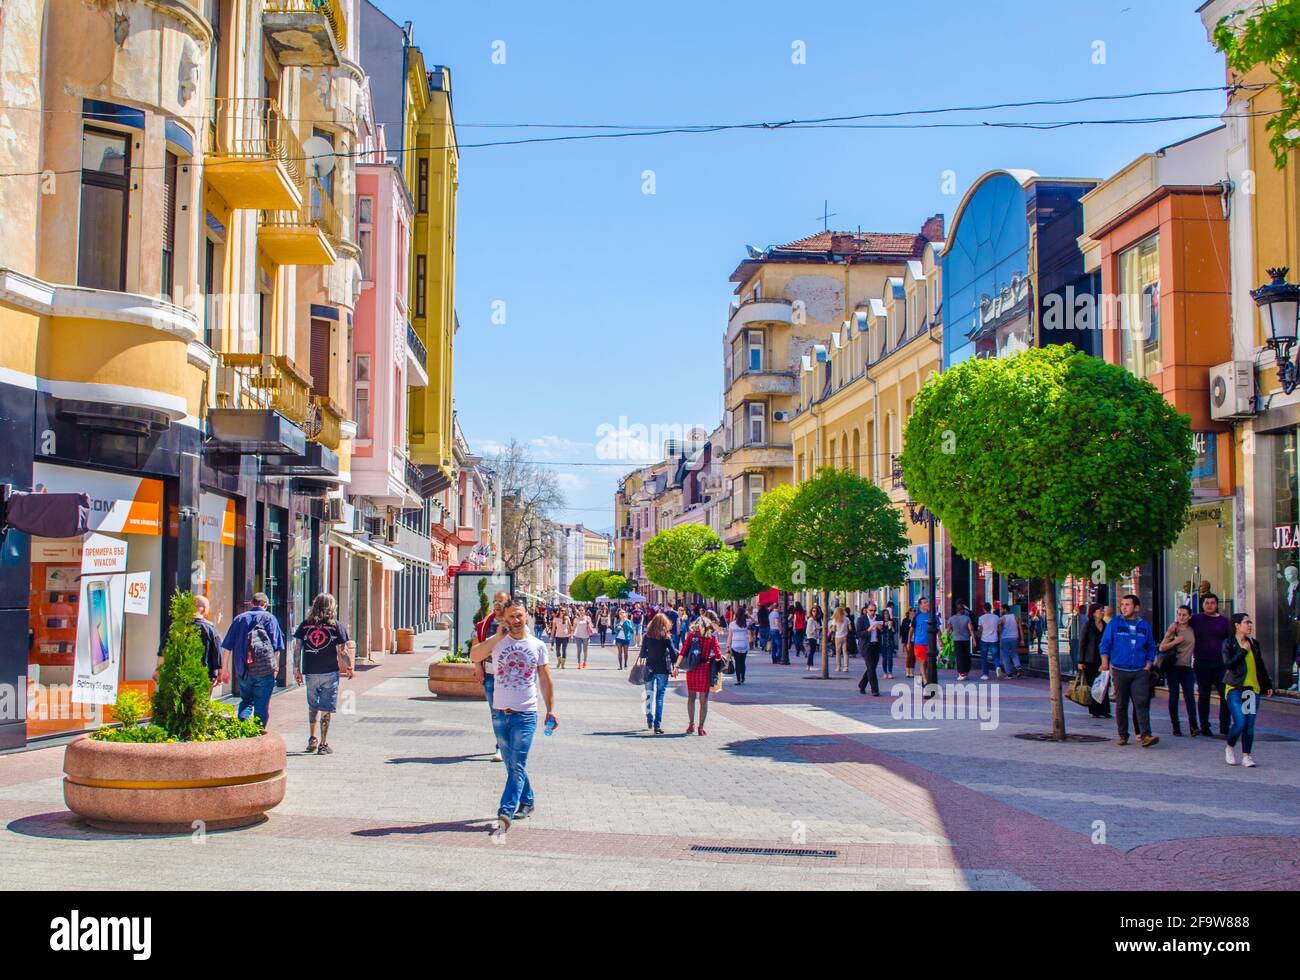 PLOVDIV, BULGARIA, APRIL 7, 2015: People are strolling through the main boulevard in center of Plovdiv which is the host of the European Capital of Cu Stock Photo